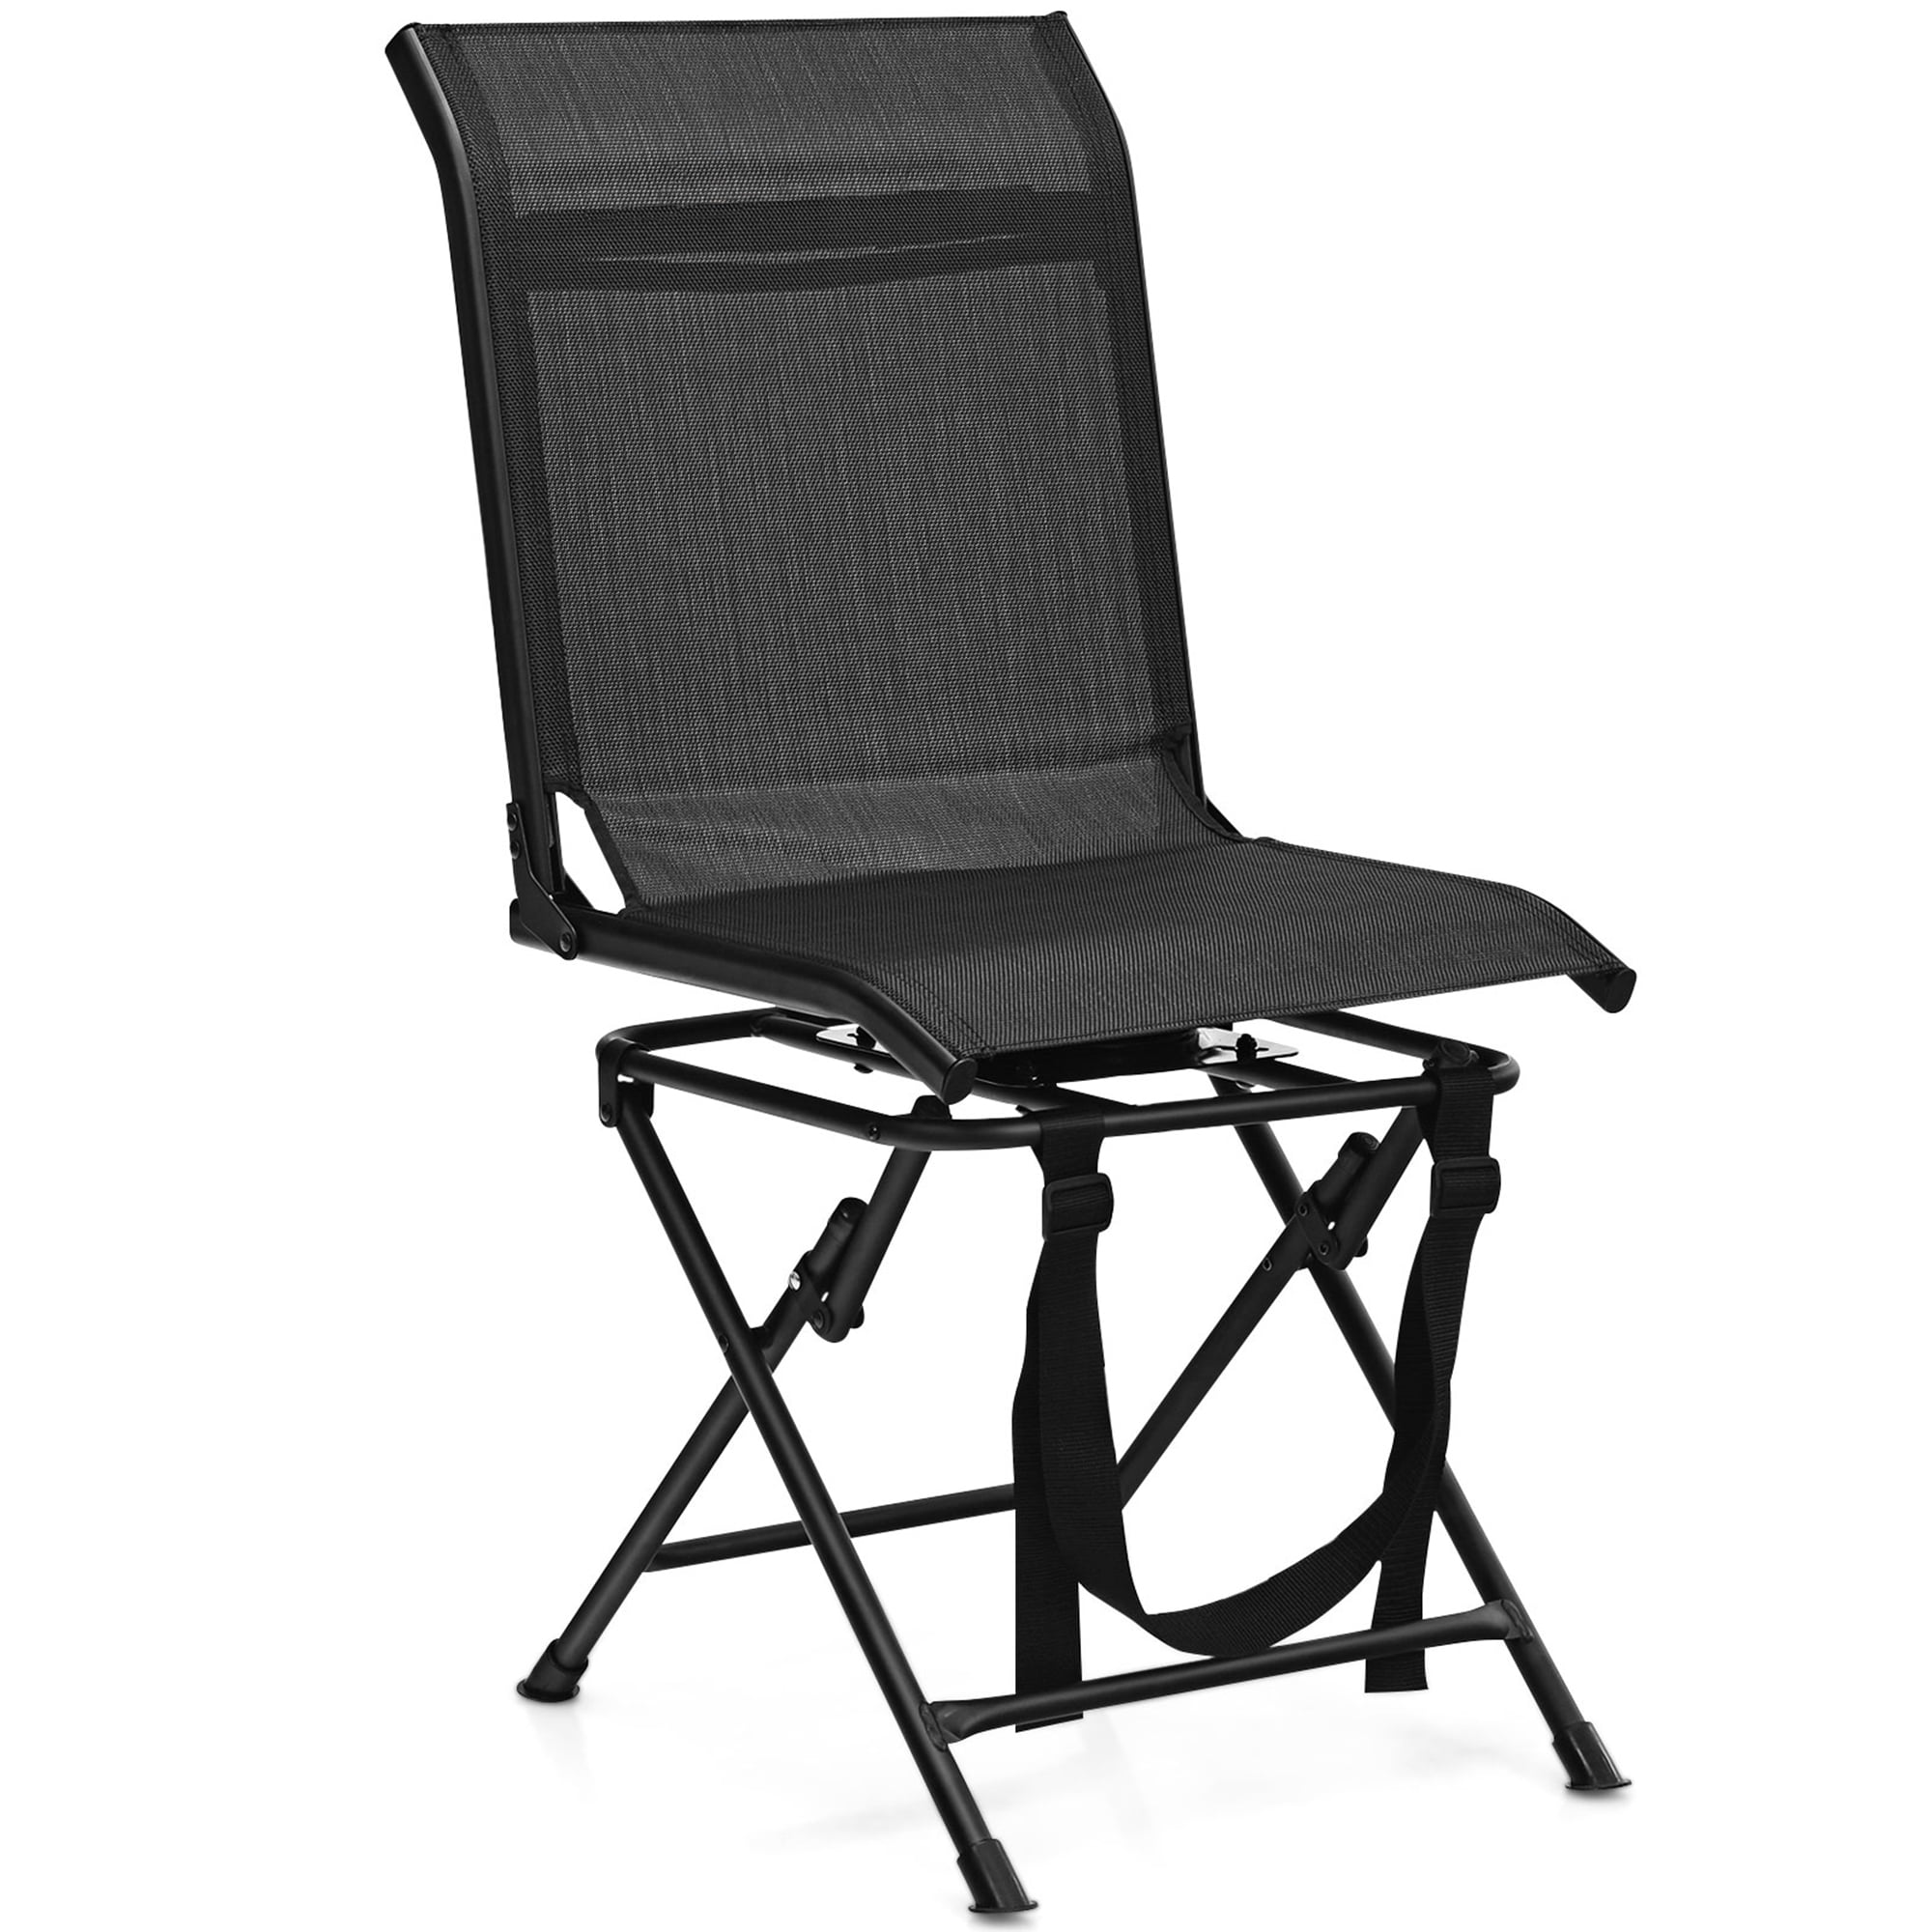 Guide Gear Big Boy Hunting Blind Chair, Portable Folding Seat for Shooting,  Comfortable Spin Swivel, 500-lb. Capacity